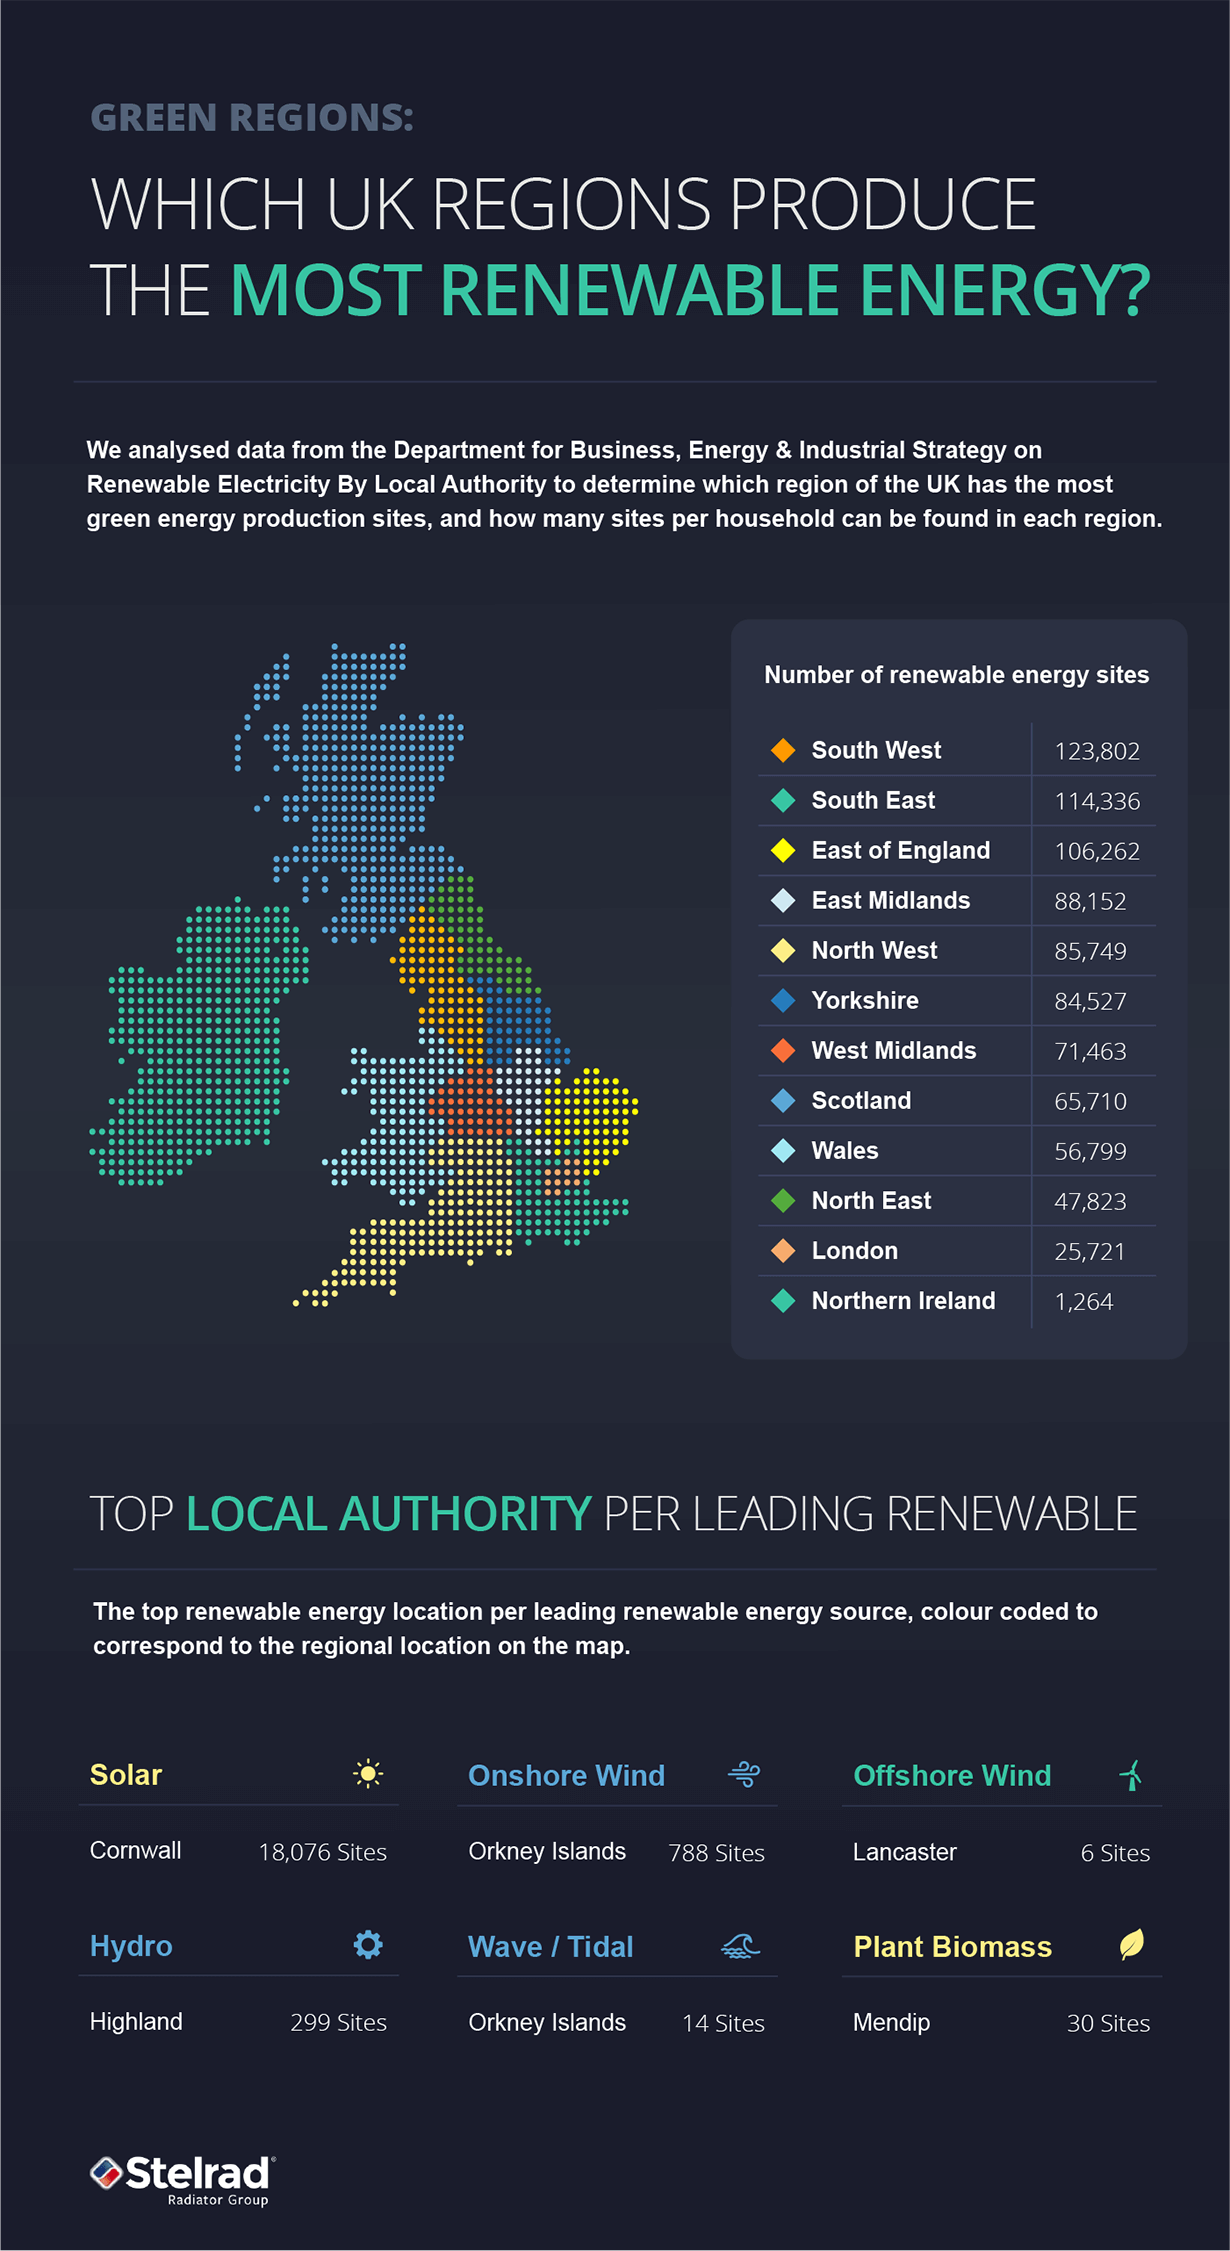 UK Green Regions: Mapped - The UK Regions With The Most Renewable Energy Sites